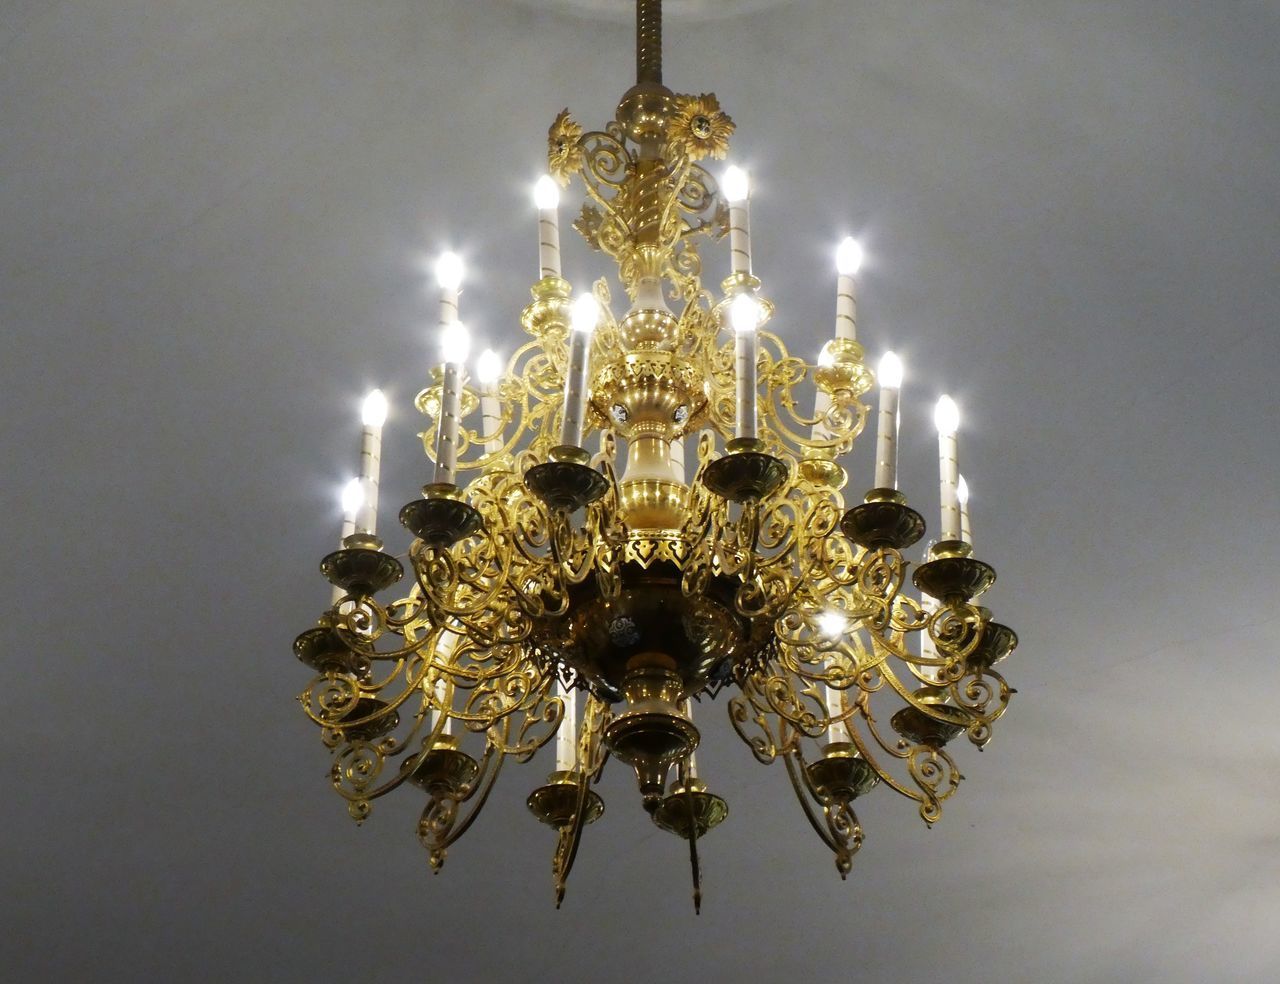 LOW ANGLE VIEW OF ILLUMINATED CHANDELIER HANGING AGAINST CEILING